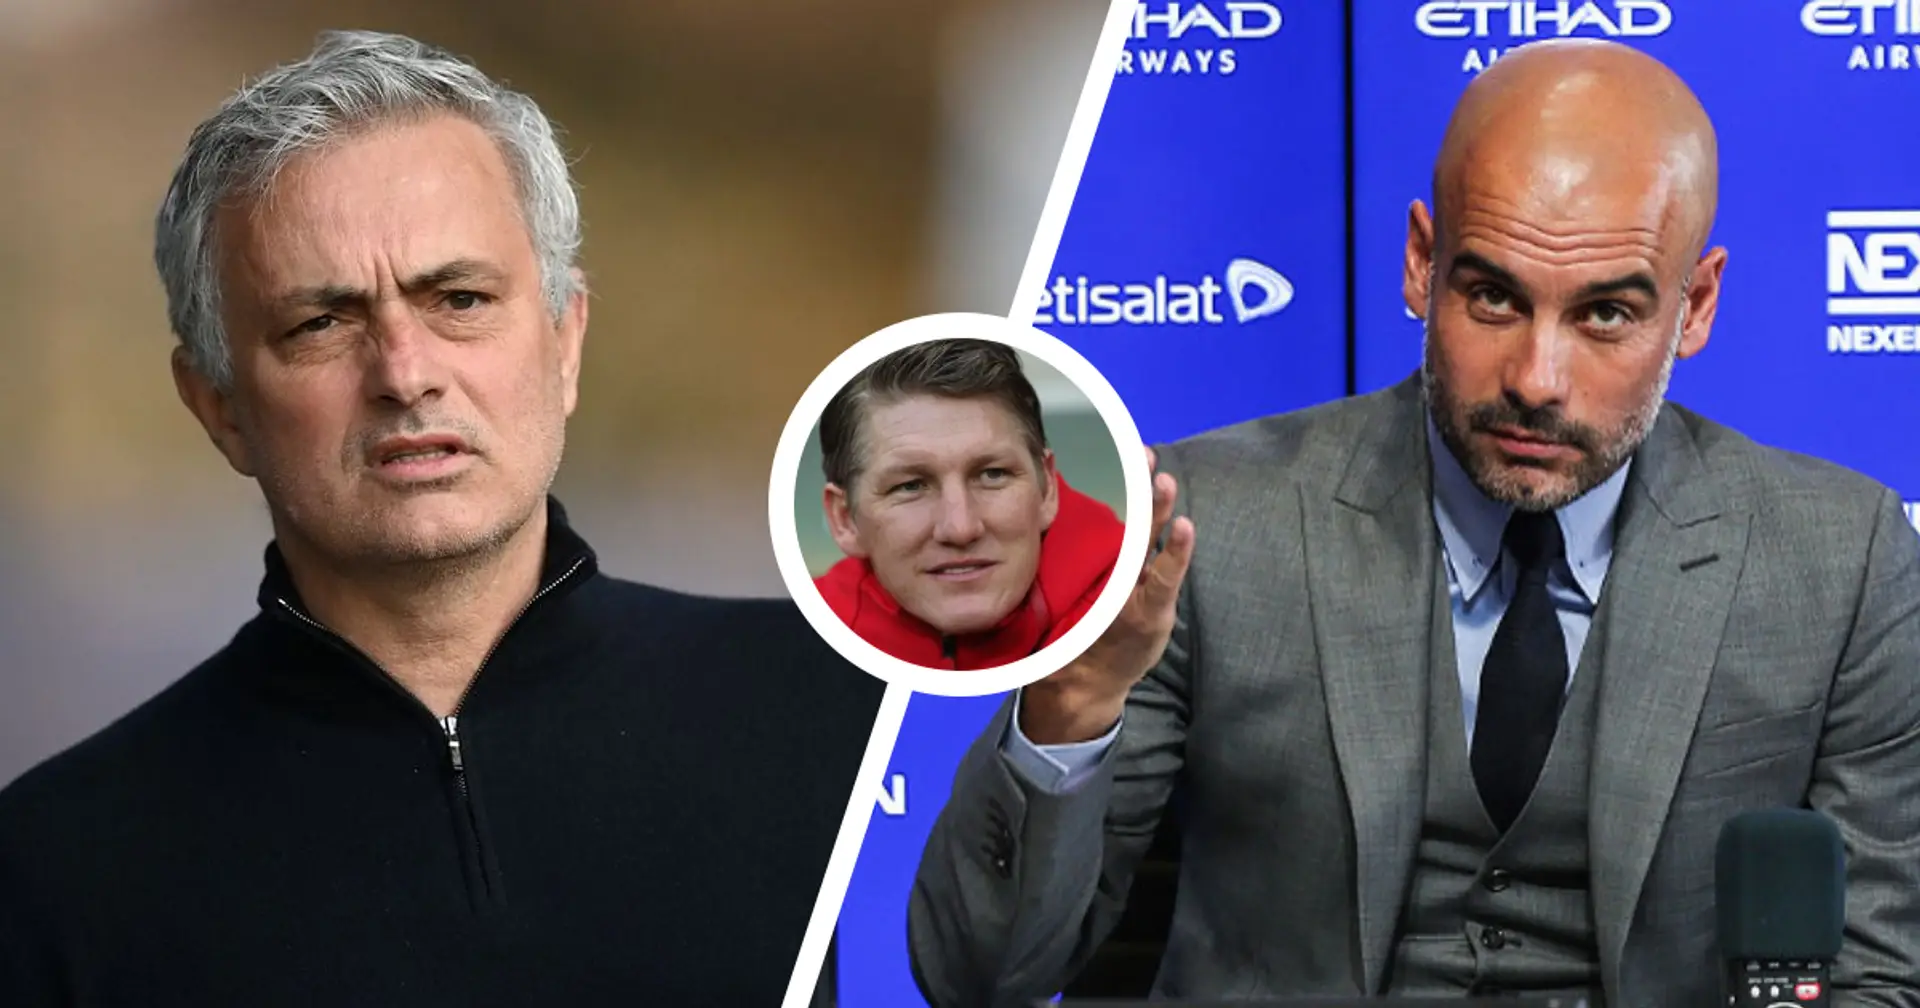 Schweinsteiger shares theory about lack of game time under Mourinho at Man United - it involves Guardiola